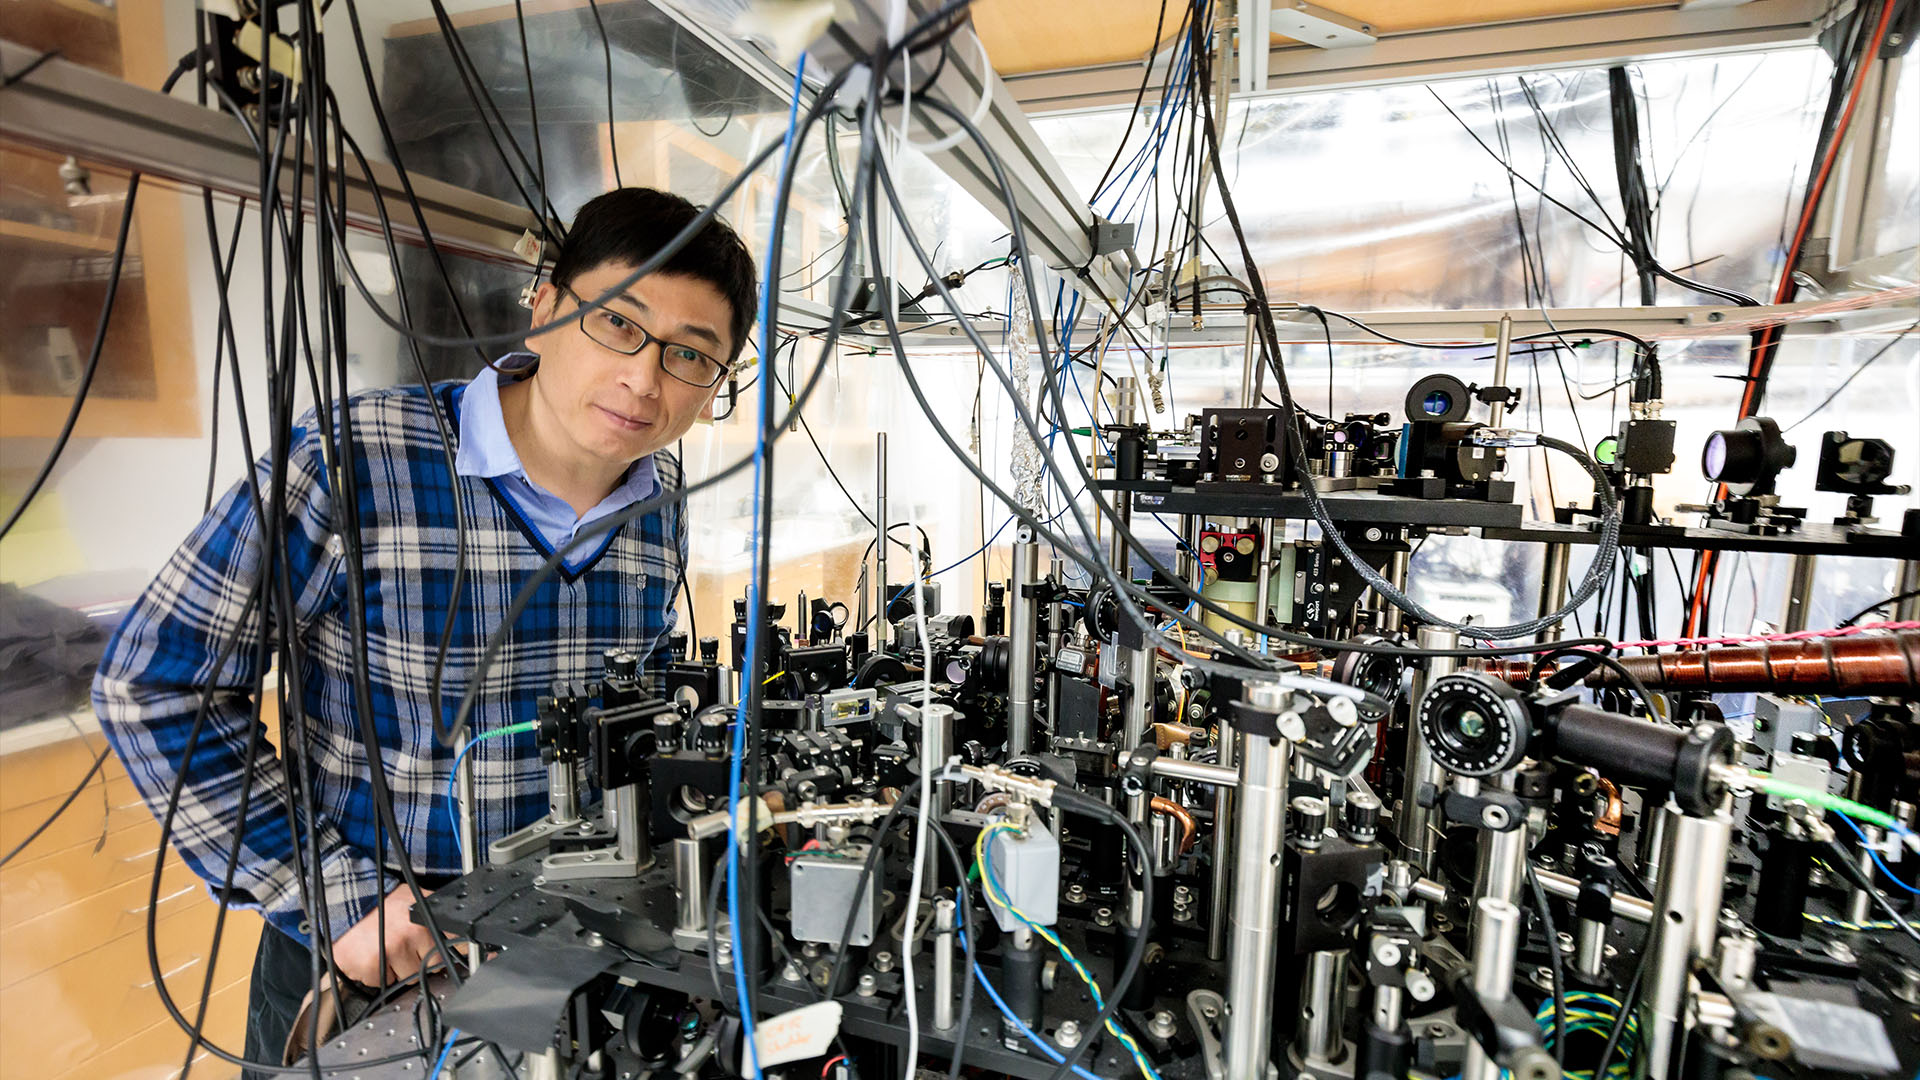 Cheng Chin poses with the apparatus used to trap cesium atoms and convert them to cesium molecules using quantum superchemistry.